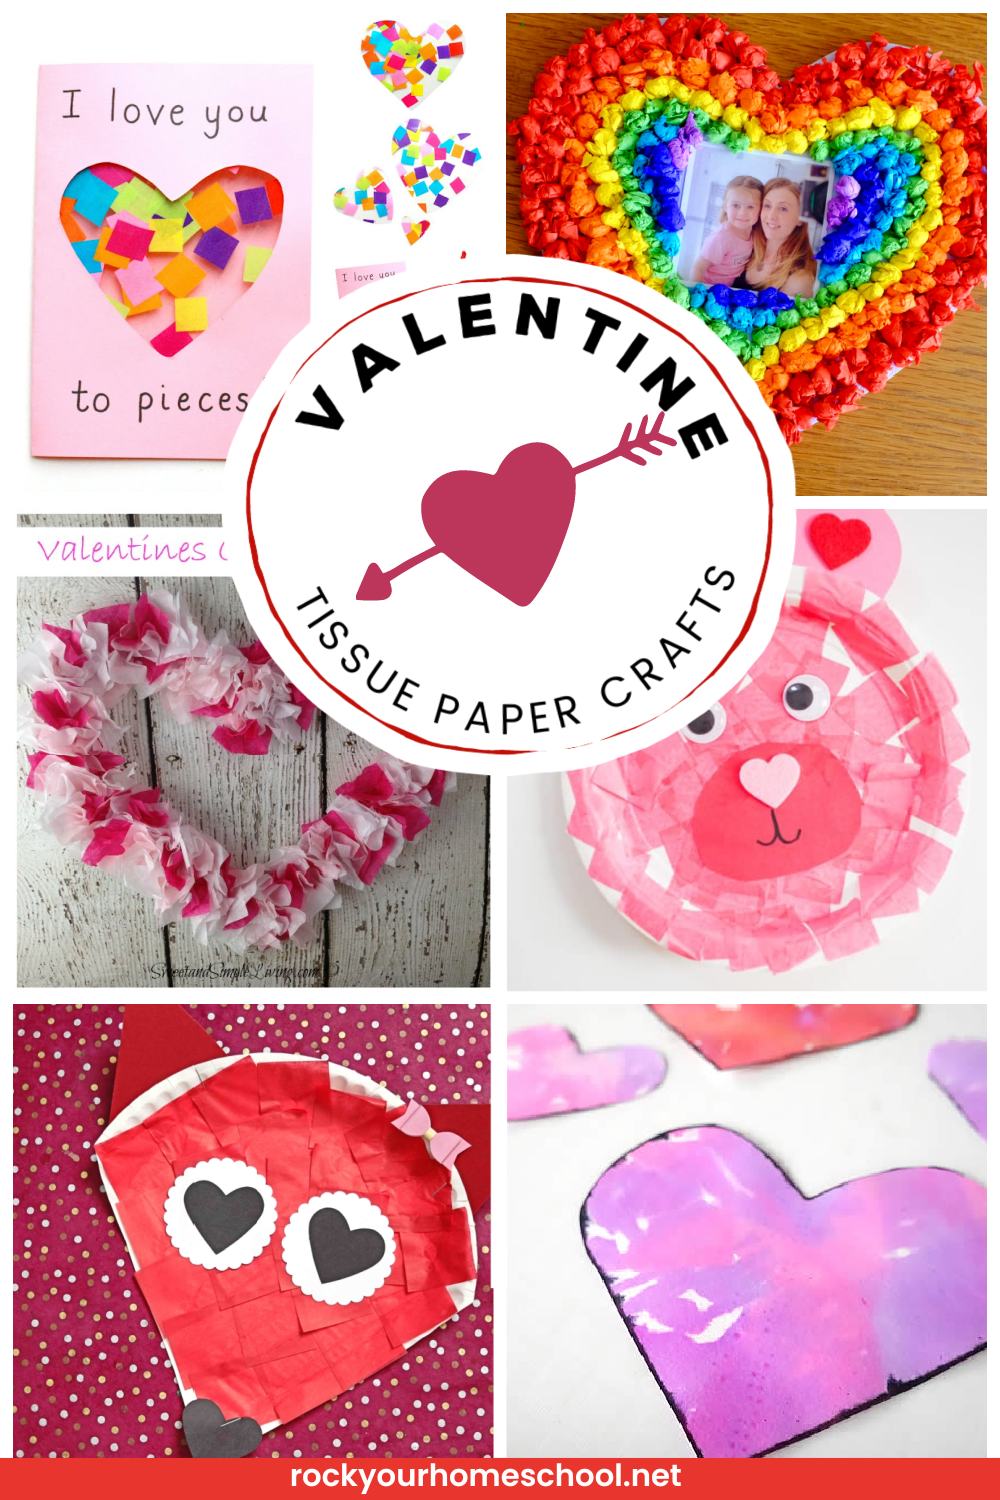 Examples of Valentine's Day tissue paper crafts with card, rainbow heart photo frame, heart frame, paper plate bear, fox, and hearts.